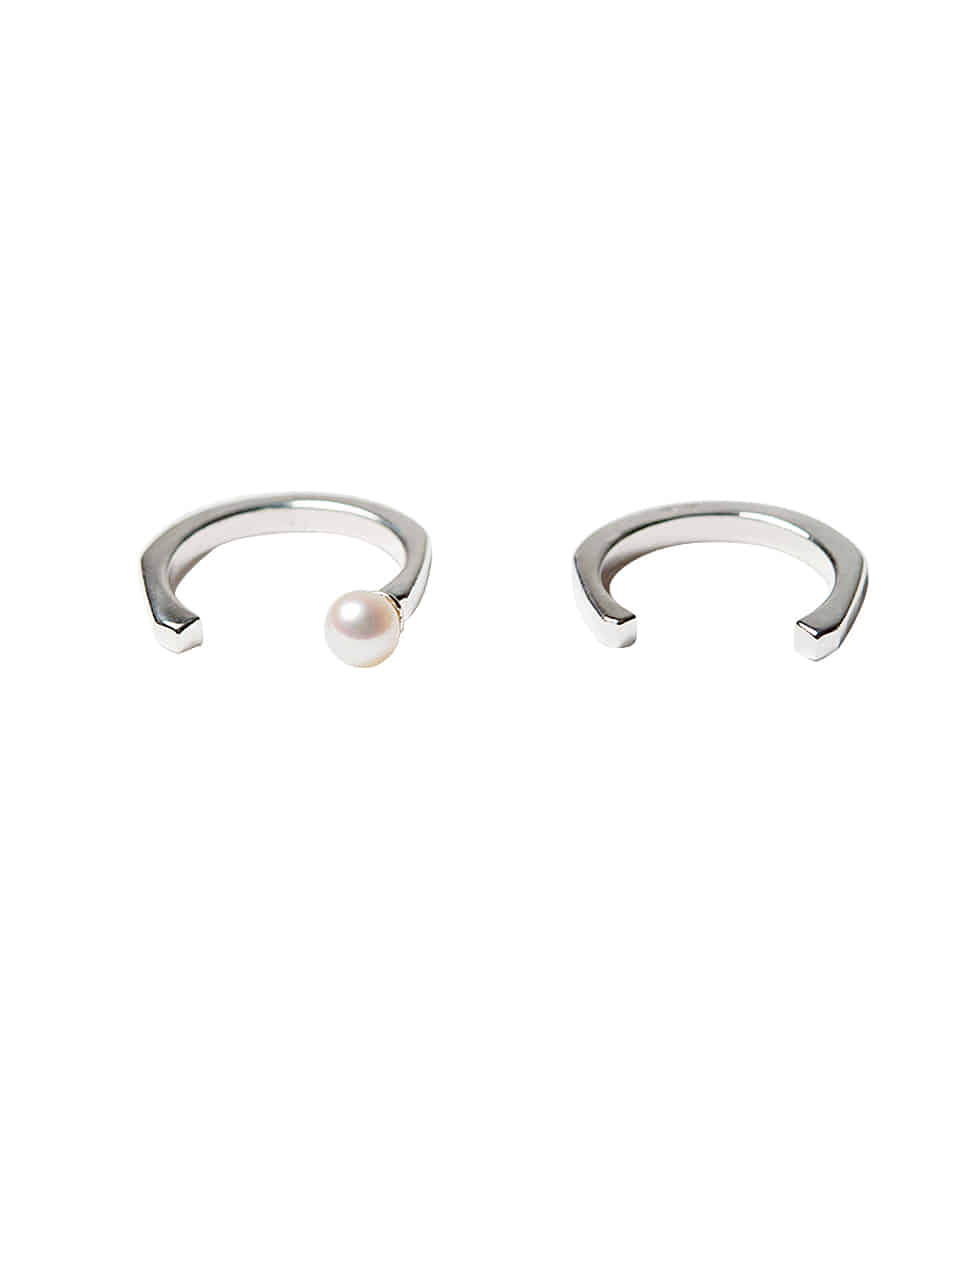 2 silver layered pearl rings set